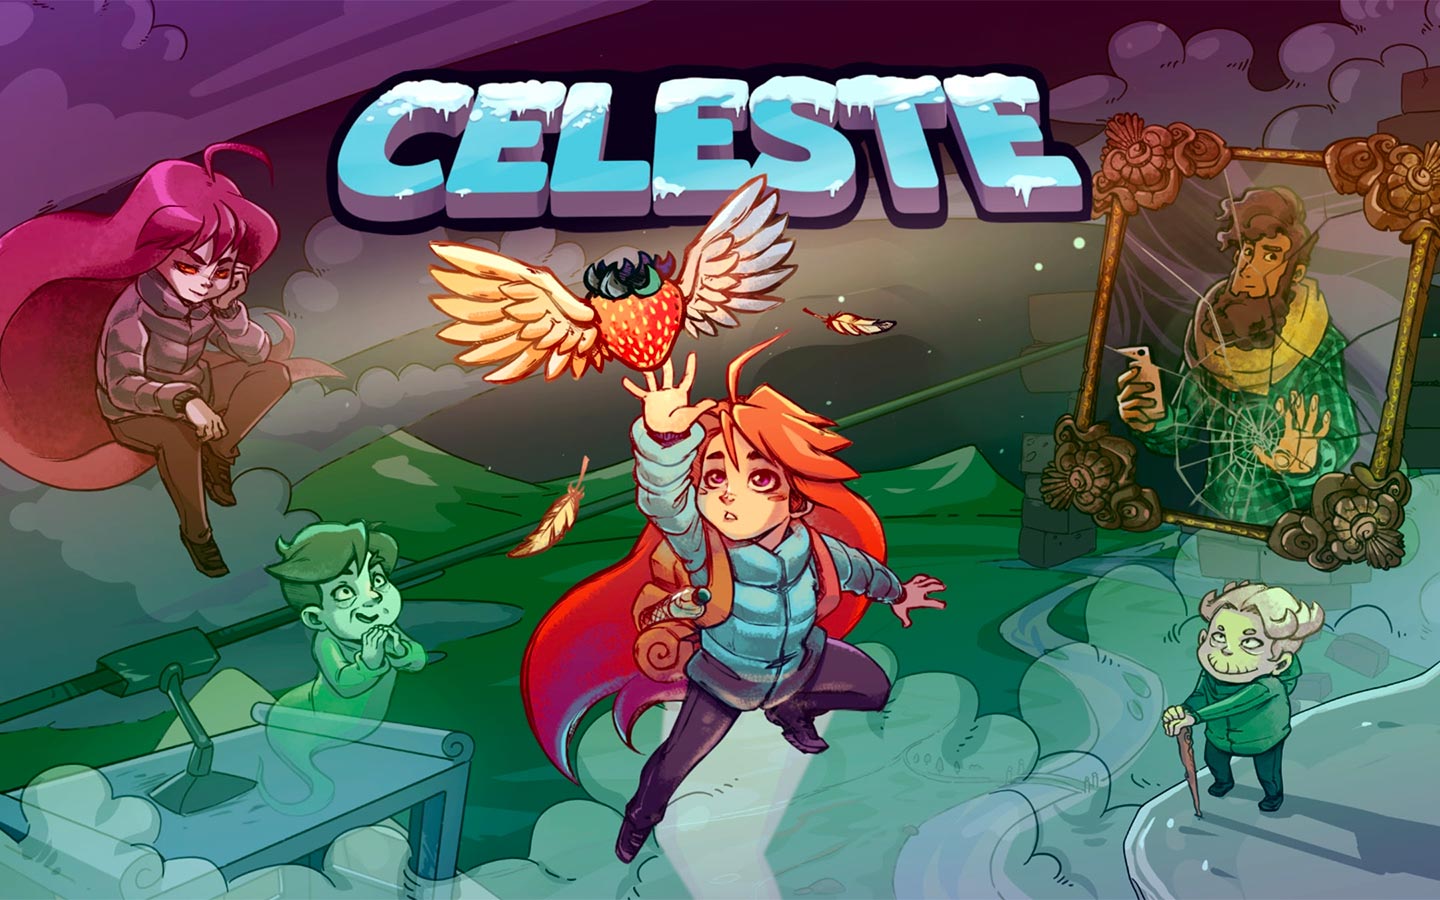 Celeste, a 2018 platform game developed and published by indie studio Matt Makes Games. The player controls Madeline, a young woman who aims to climb Celeste Mountain